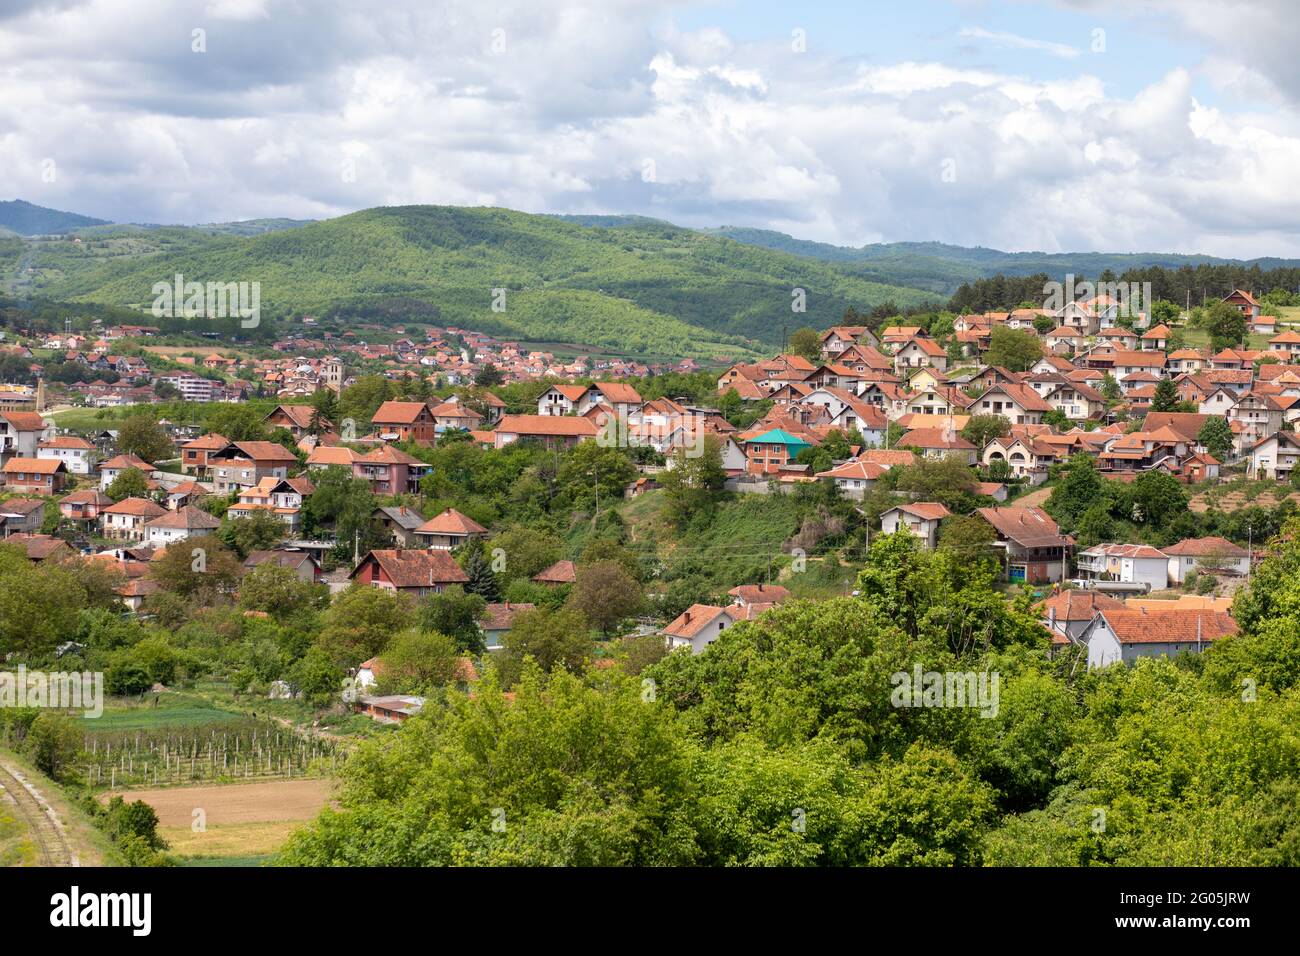 Kursumlija, view, town and municipality located in the Toplica District of the southern Serbia Stock Photo